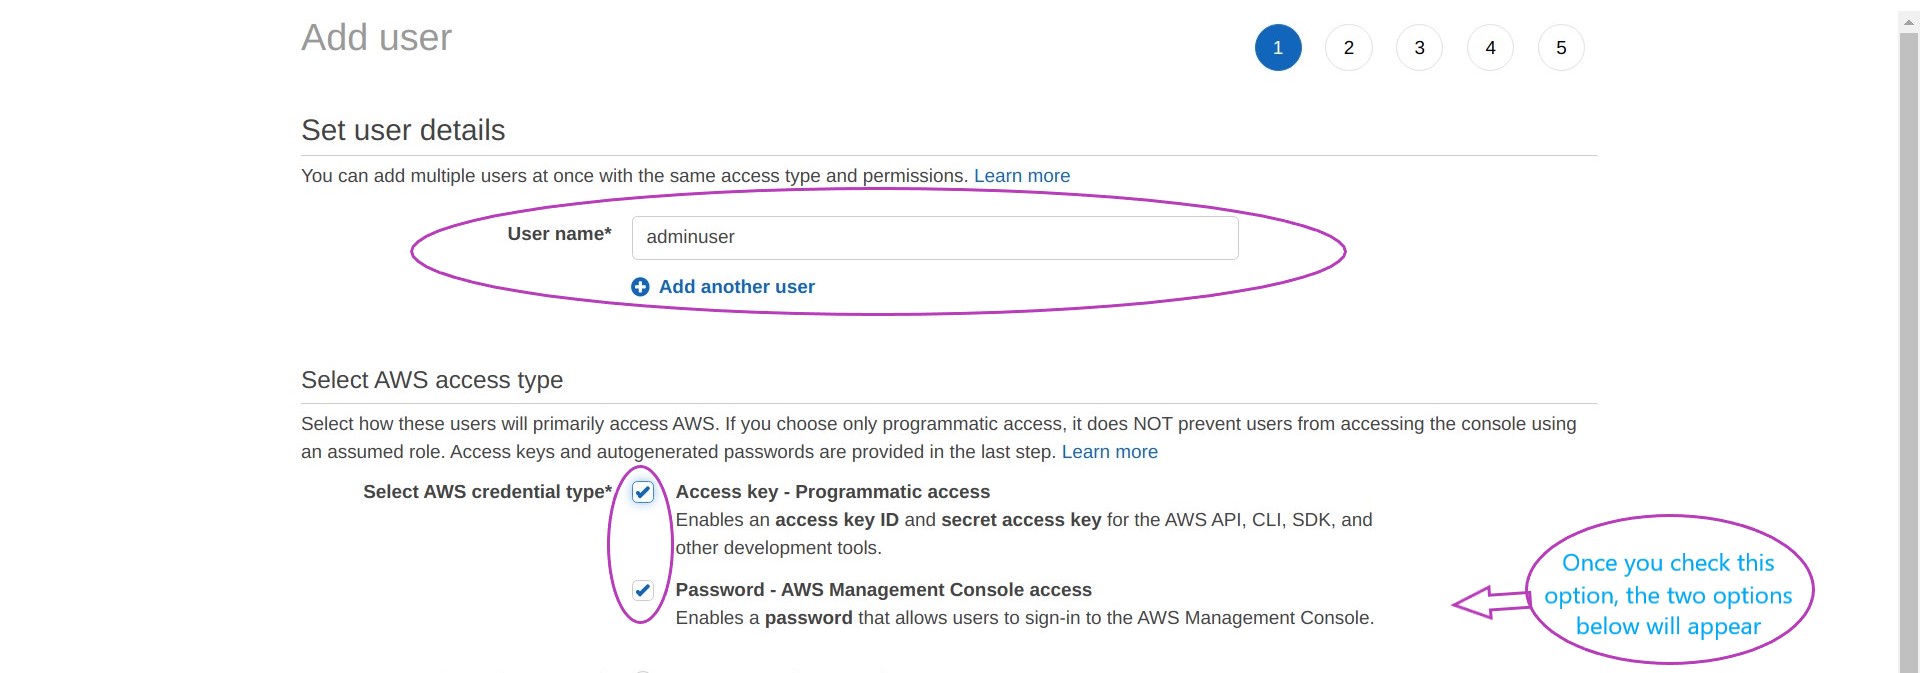 Screen shot of AWS Console IAM Add user page in a browser showing the "User name" box with a user name typed in (adminuser) and circled, and the boxes "Access Key - Programmatic access" and "Password - AWS Management Console access" checked and circled